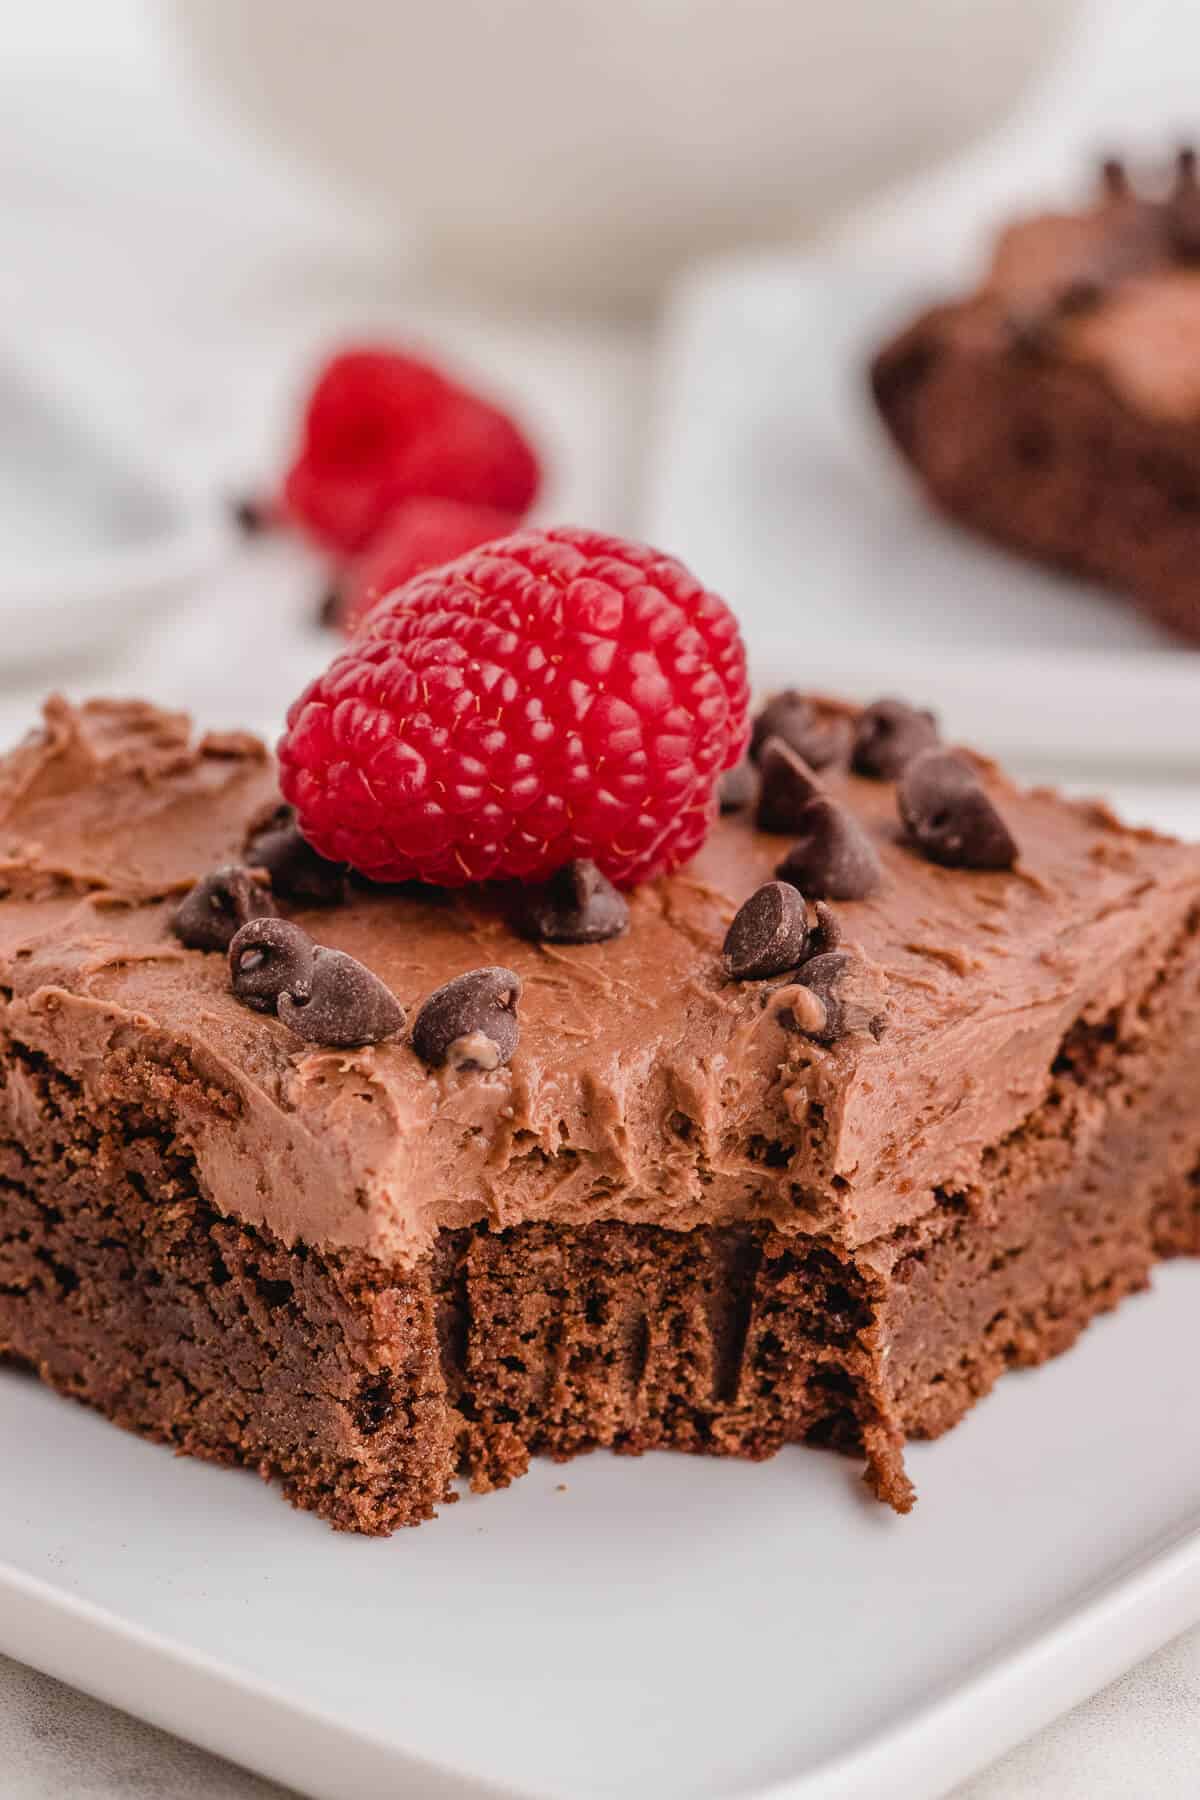 A chocolate raspberry brownie with a bite out of it.